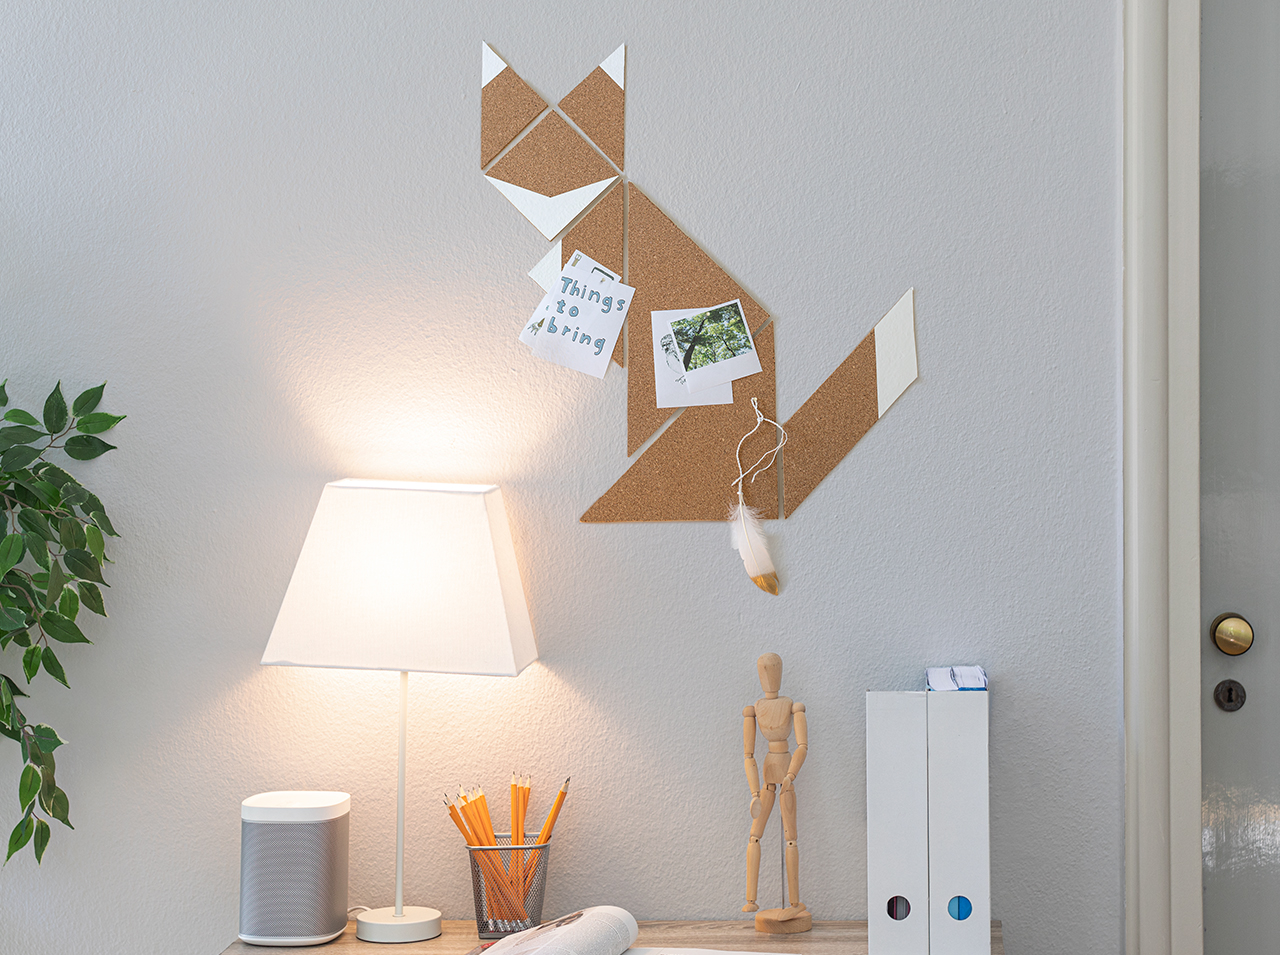 Modern cork pinboard in the shape of a fox with geometric decoration in white hanging on a wall by the desk.